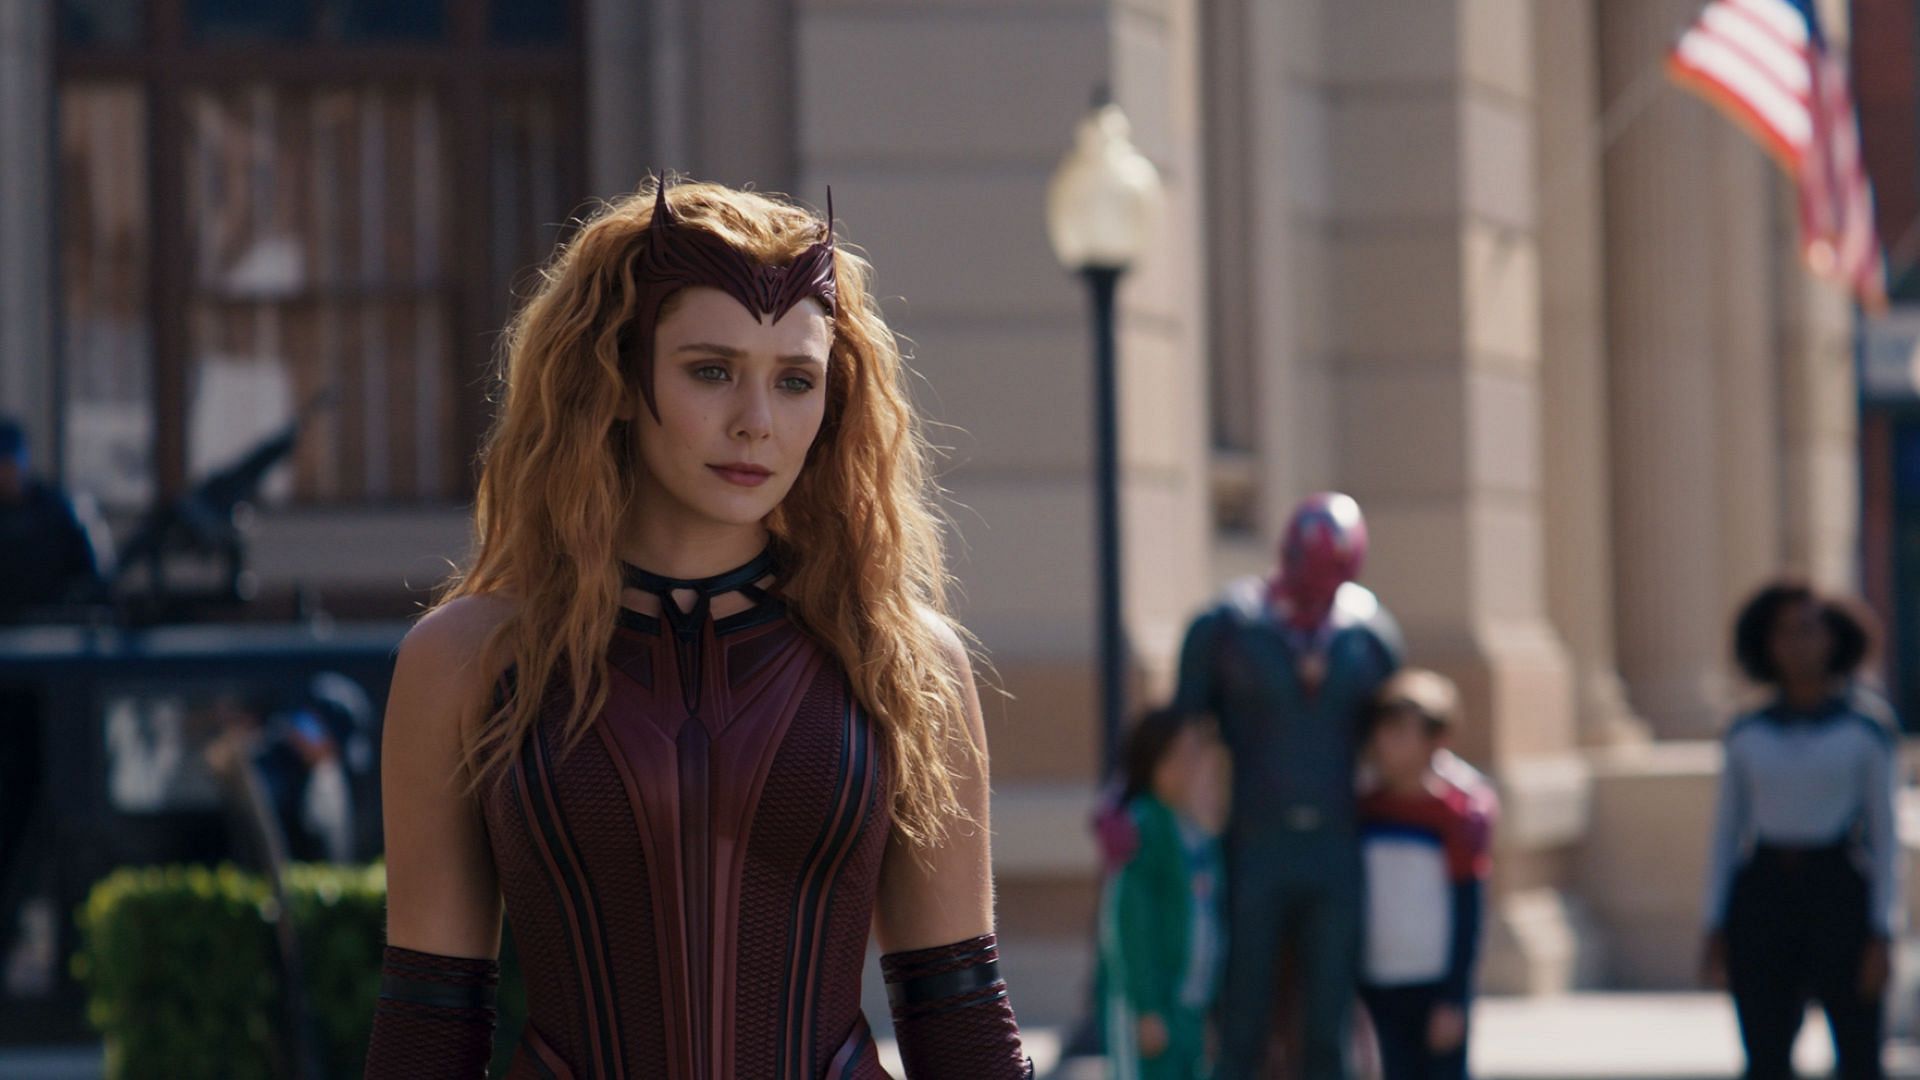 Wielding immense power, Scarlet Witch, aka Wanda Maximoff, has captured the hearts of fans (Image via Marvel Studios)